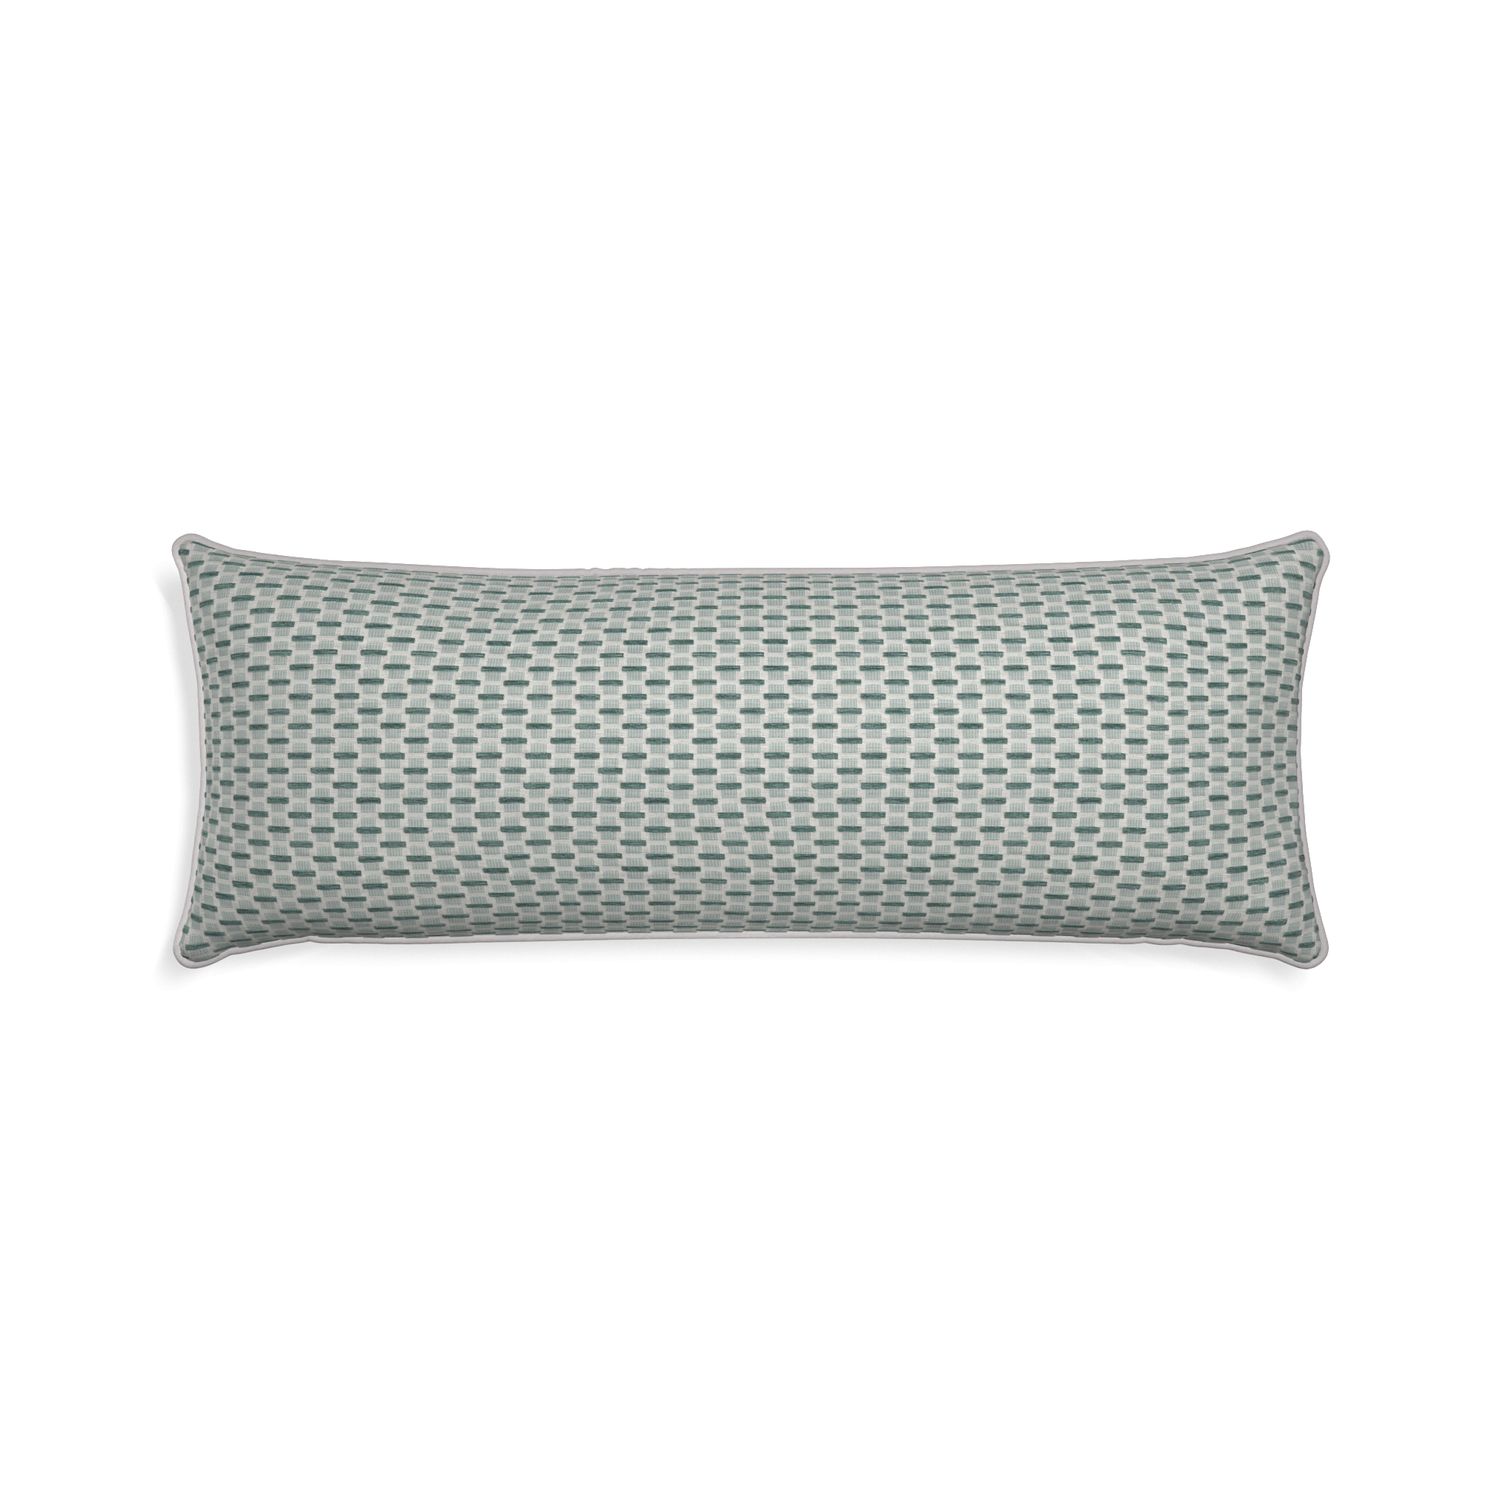 Xl-lumbar willow mint custom green geometric chenillepillow with pebble piping on white background